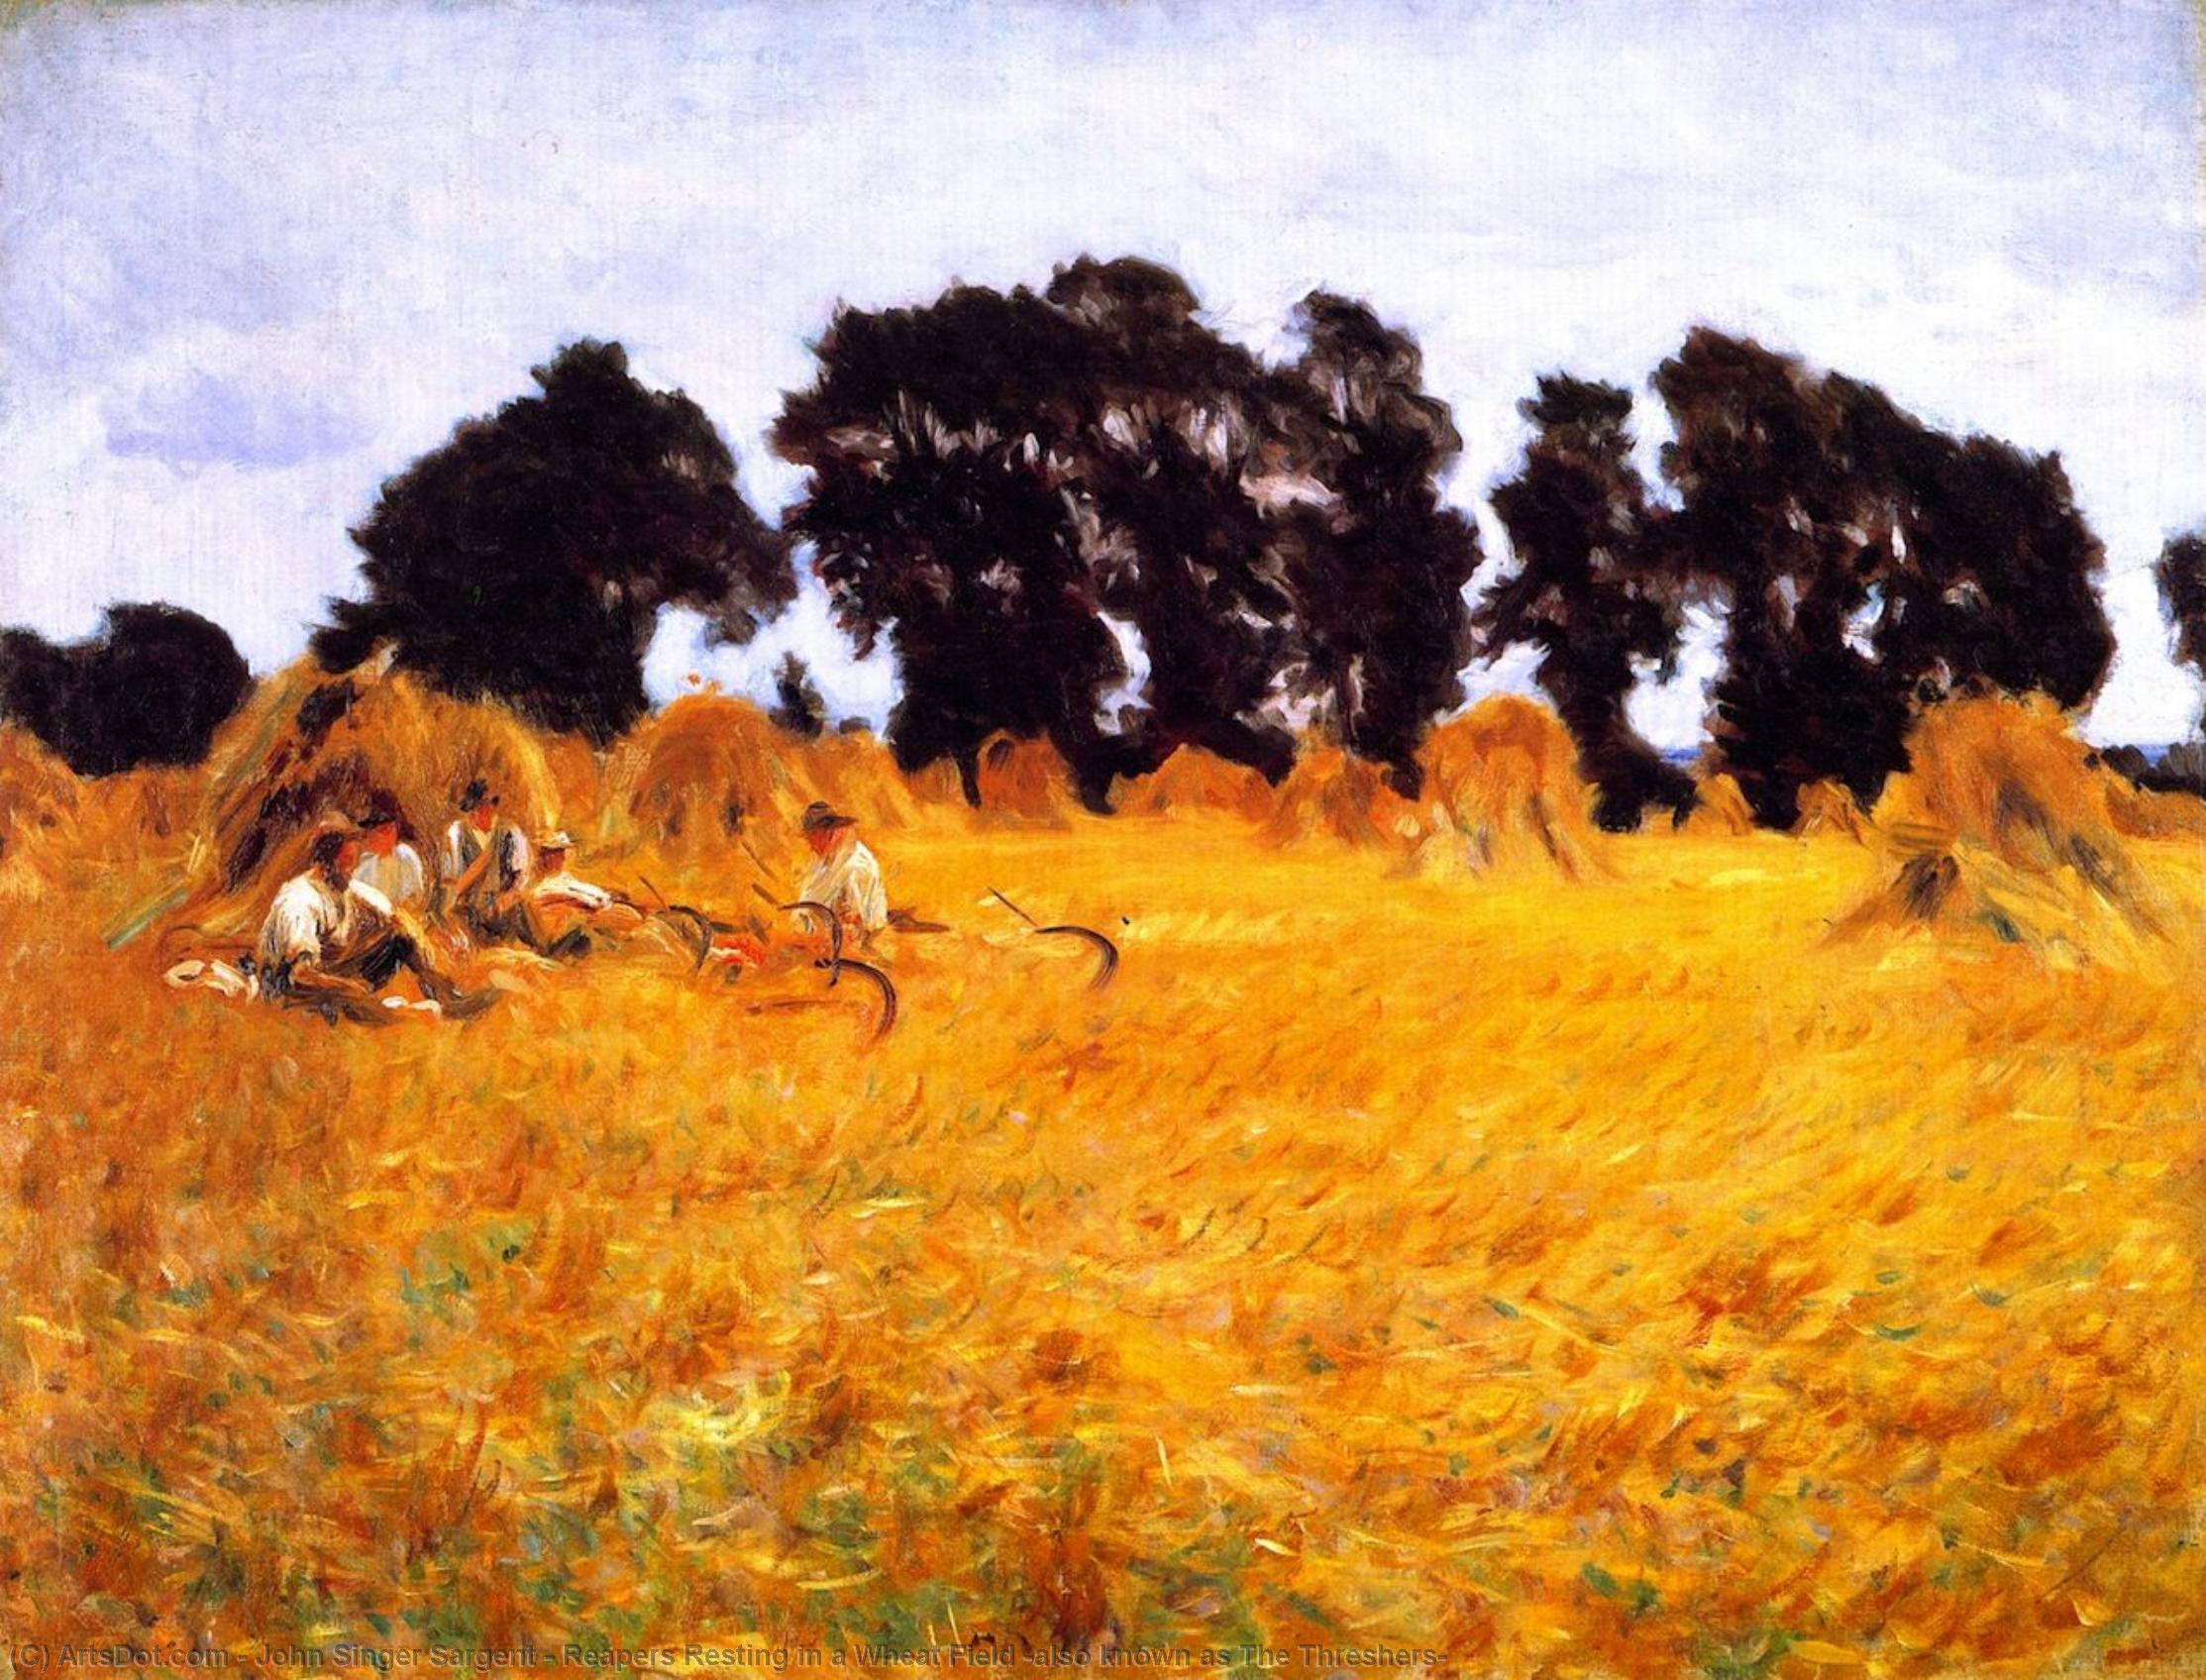 Wikioo.org - Encyklopedia Sztuk Pięknych - Malarstwo, Grafika John Singer Sargent - Reapers Resting in a Wheat Field (also known as The Threshers)